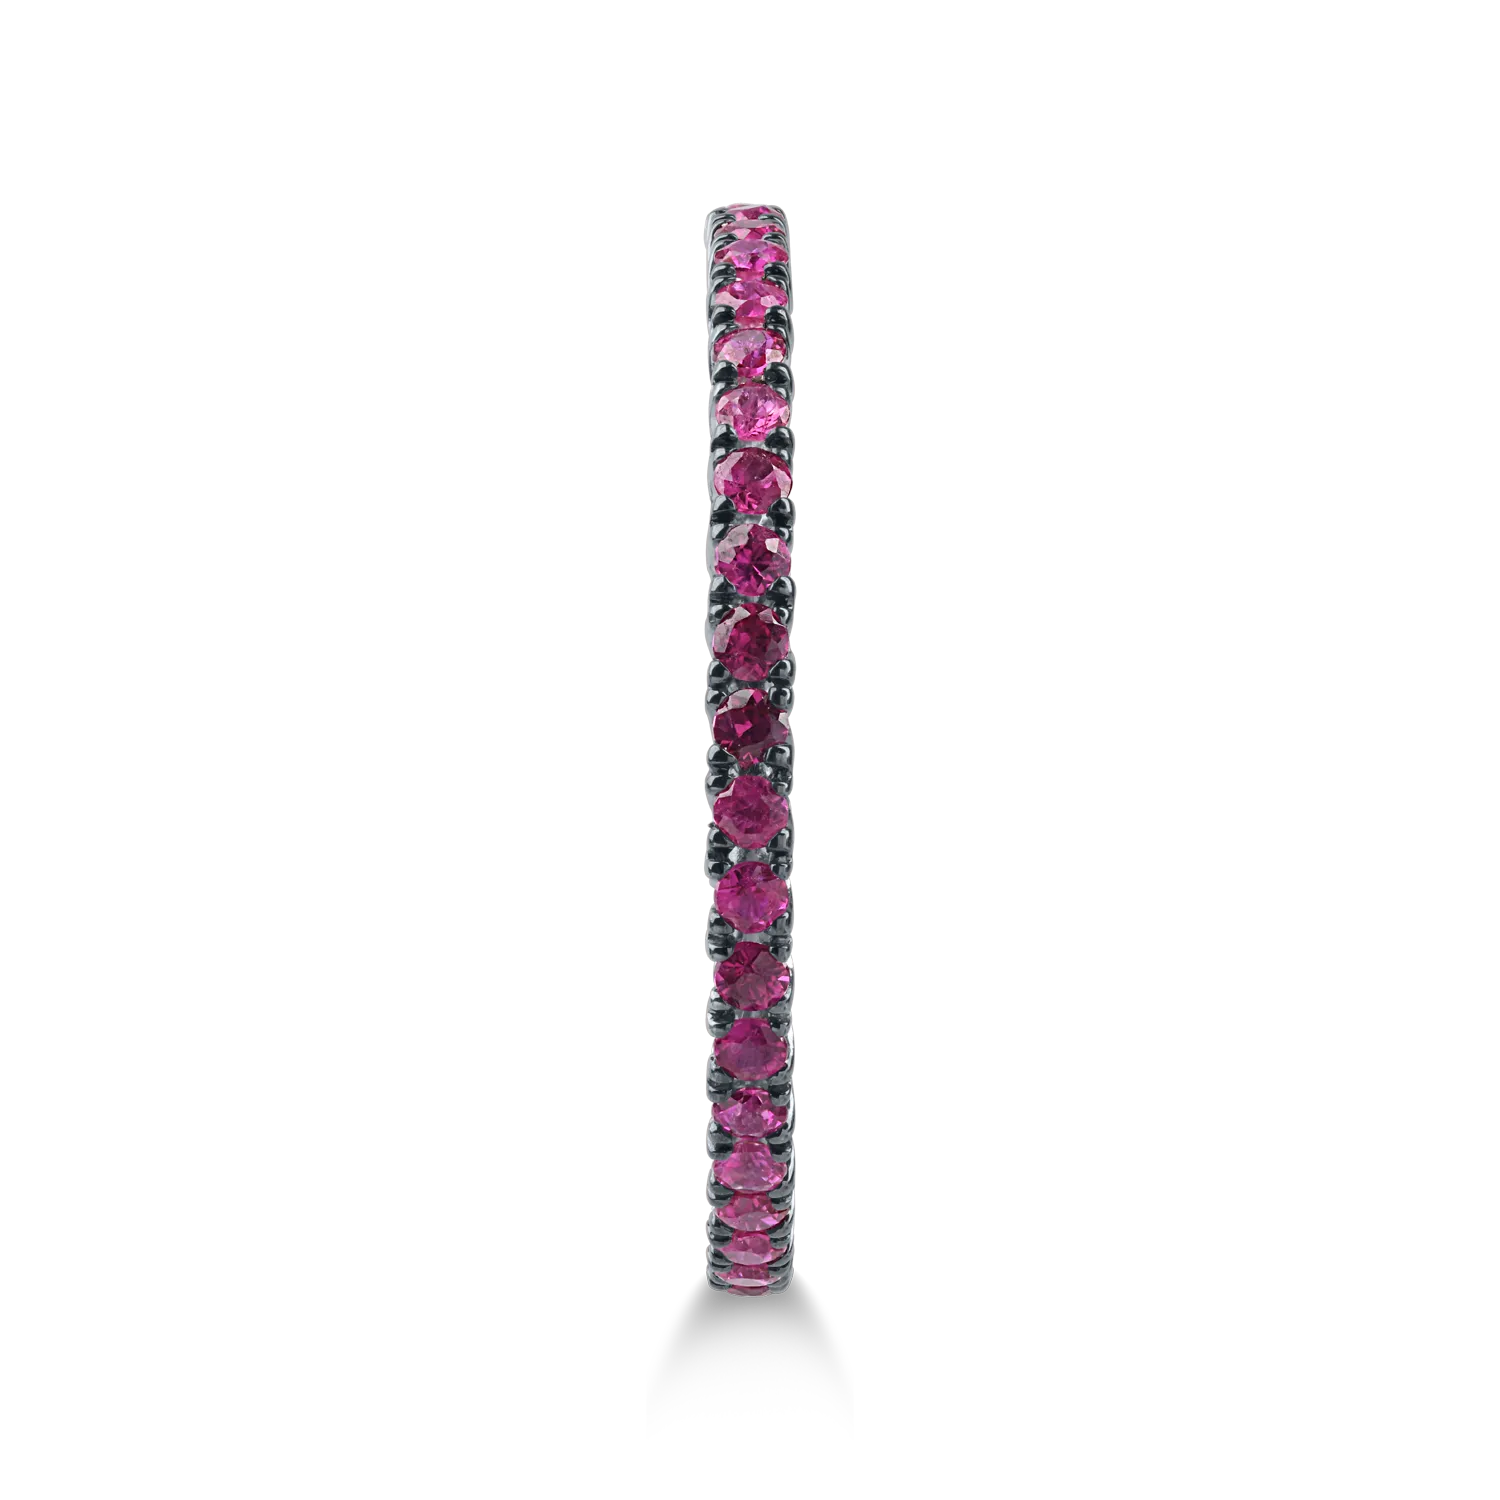 Eternity ring in white gold with 0.56ct rubies